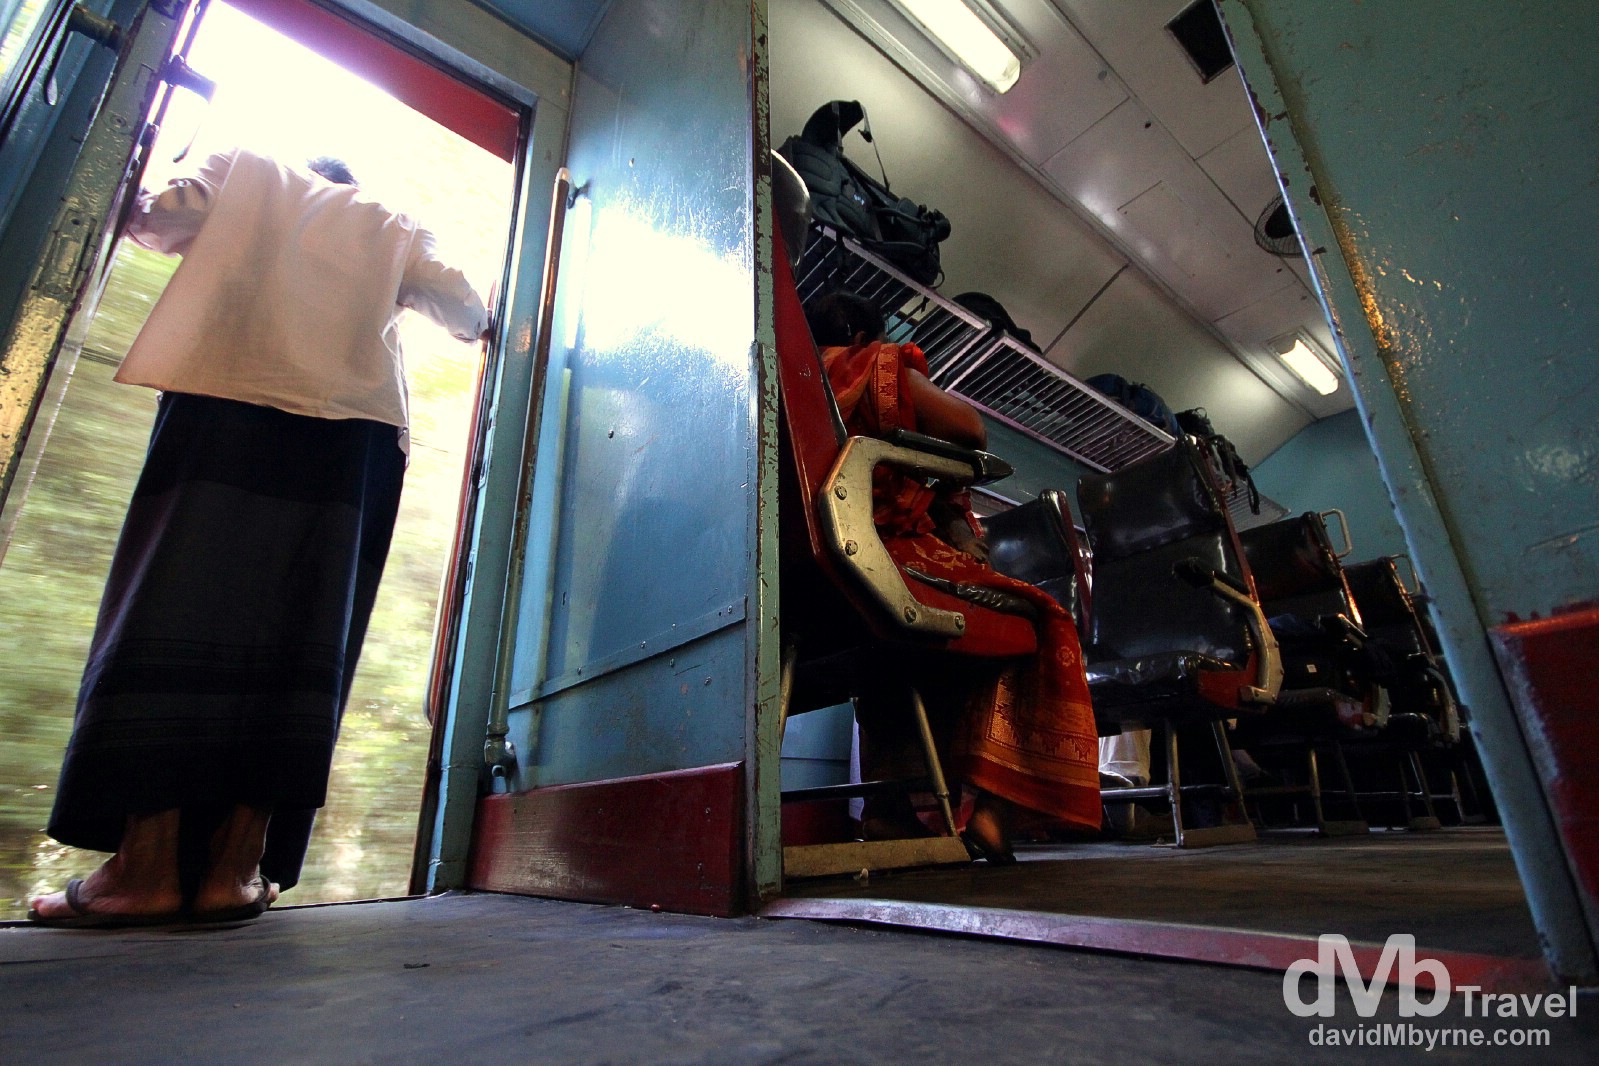 A sparsely populated second class carriage on the Badulla to Colombo train, Sri Lanka. September 5th 2012.